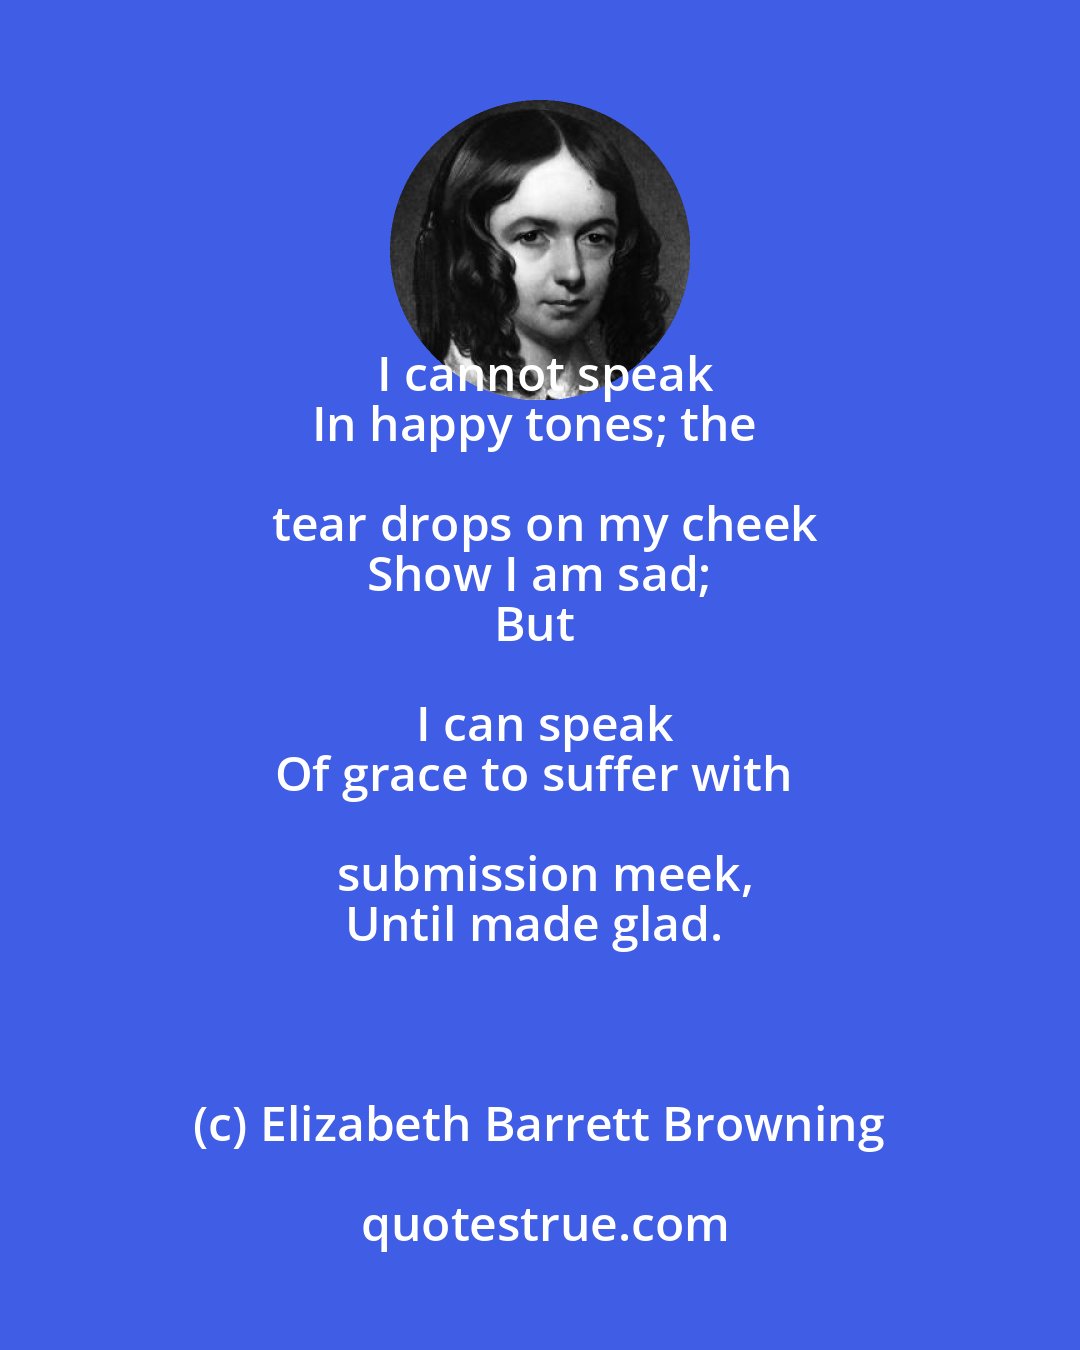 Elizabeth Barrett Browning: I cannot speak
In happy tones; the tear drops on my cheek
Show I am sad;
But I can speak
Of grace to suffer with submission meek,
Until made glad.